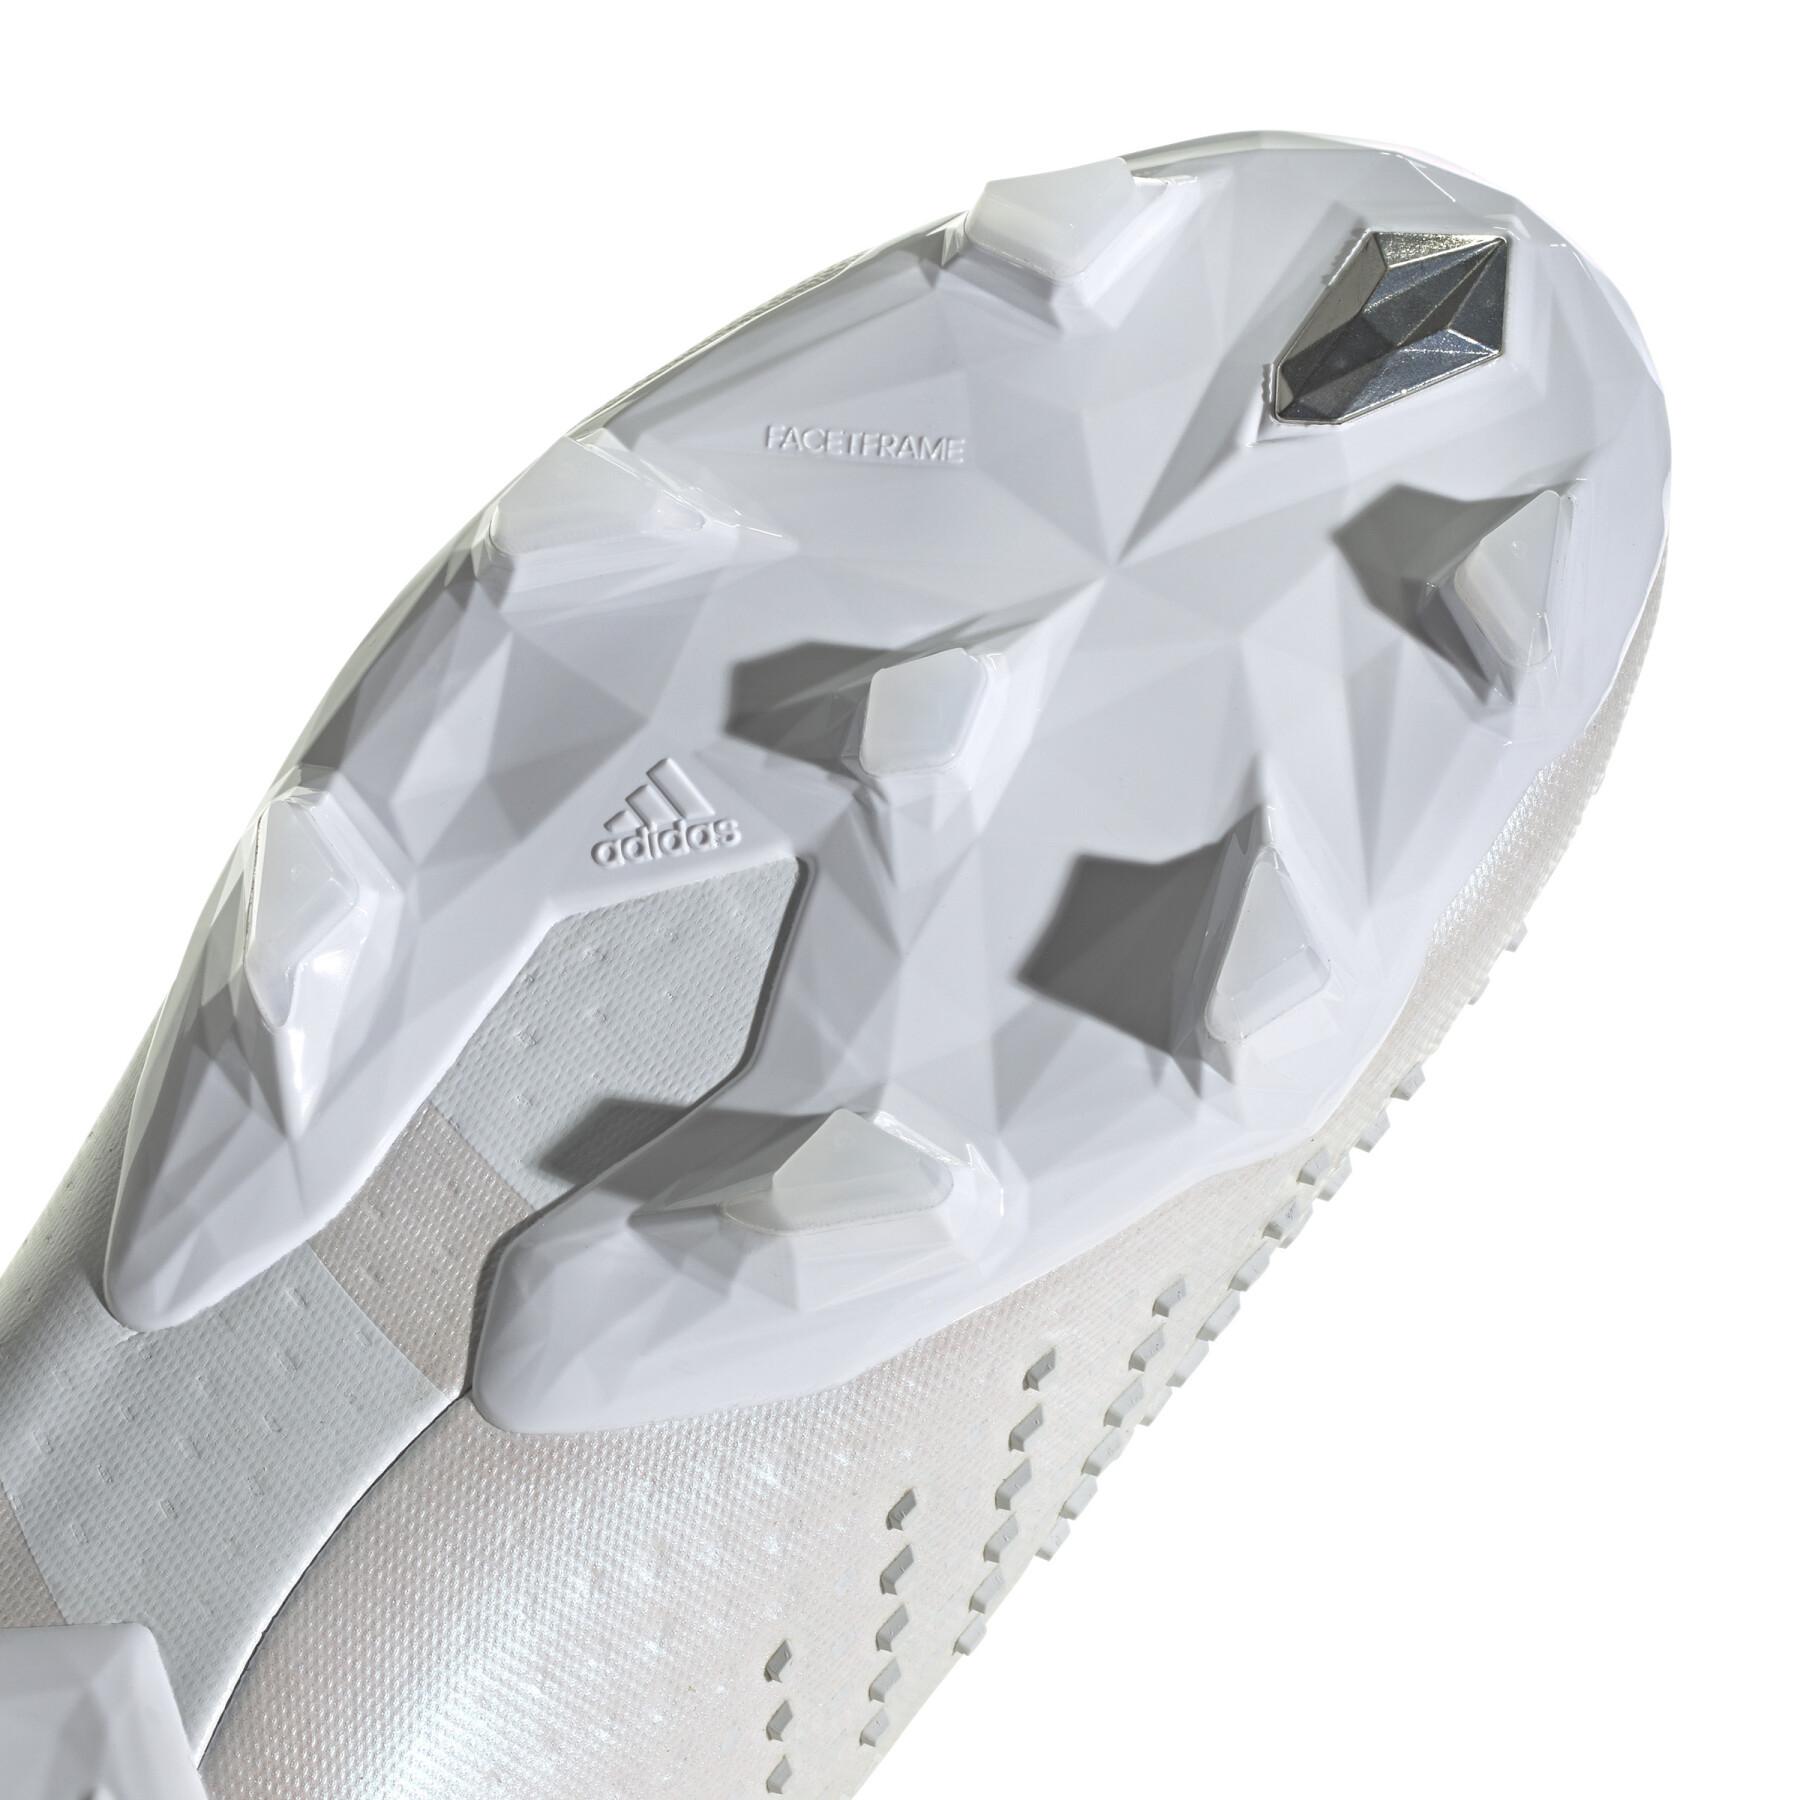 Soccer cleats adidas Predator Accuracy+ FG - Pearlized Pack